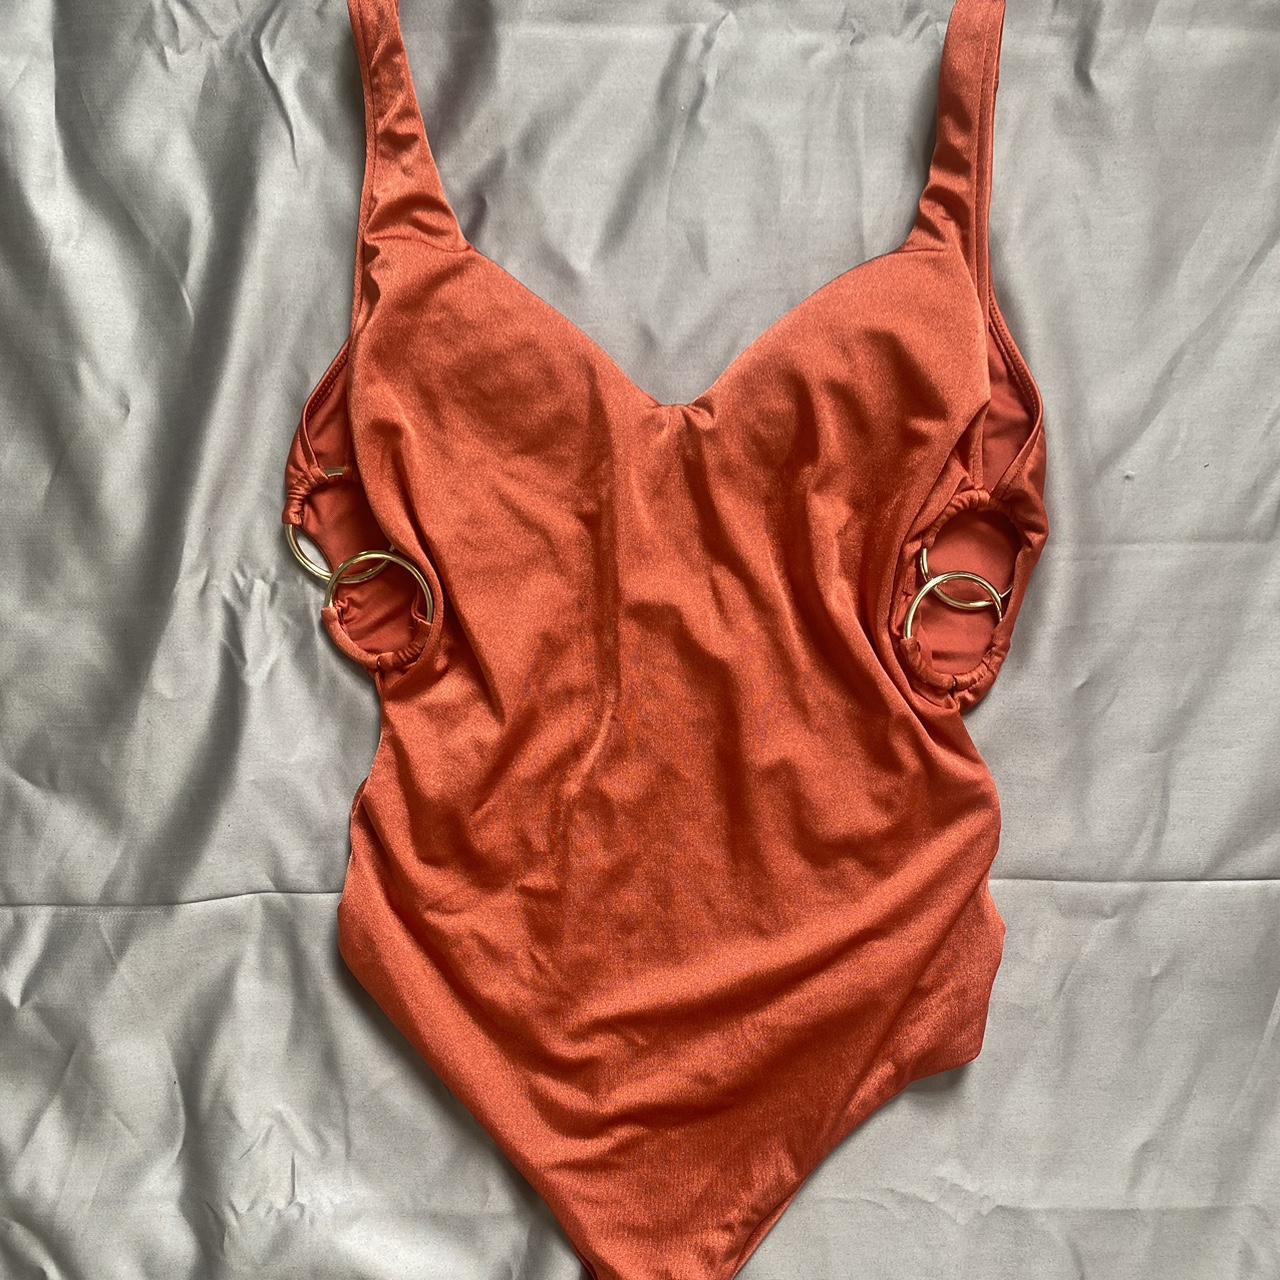 Calzedonia Women's Red and Orange Swimsuit-one-piece